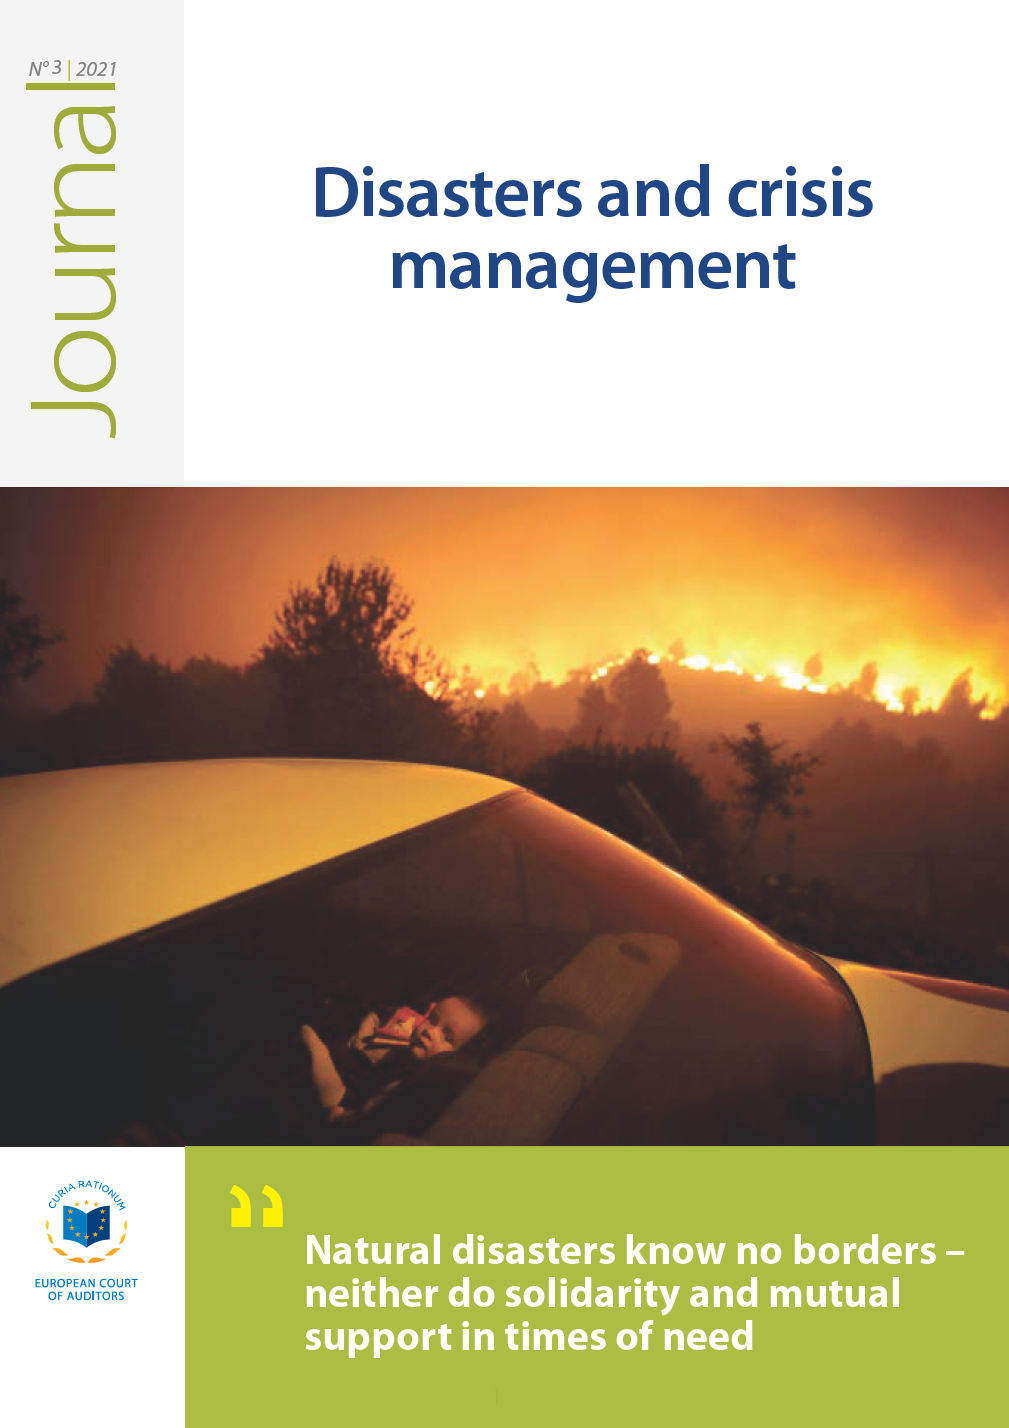 ECA Journal - Disasters and crisis management